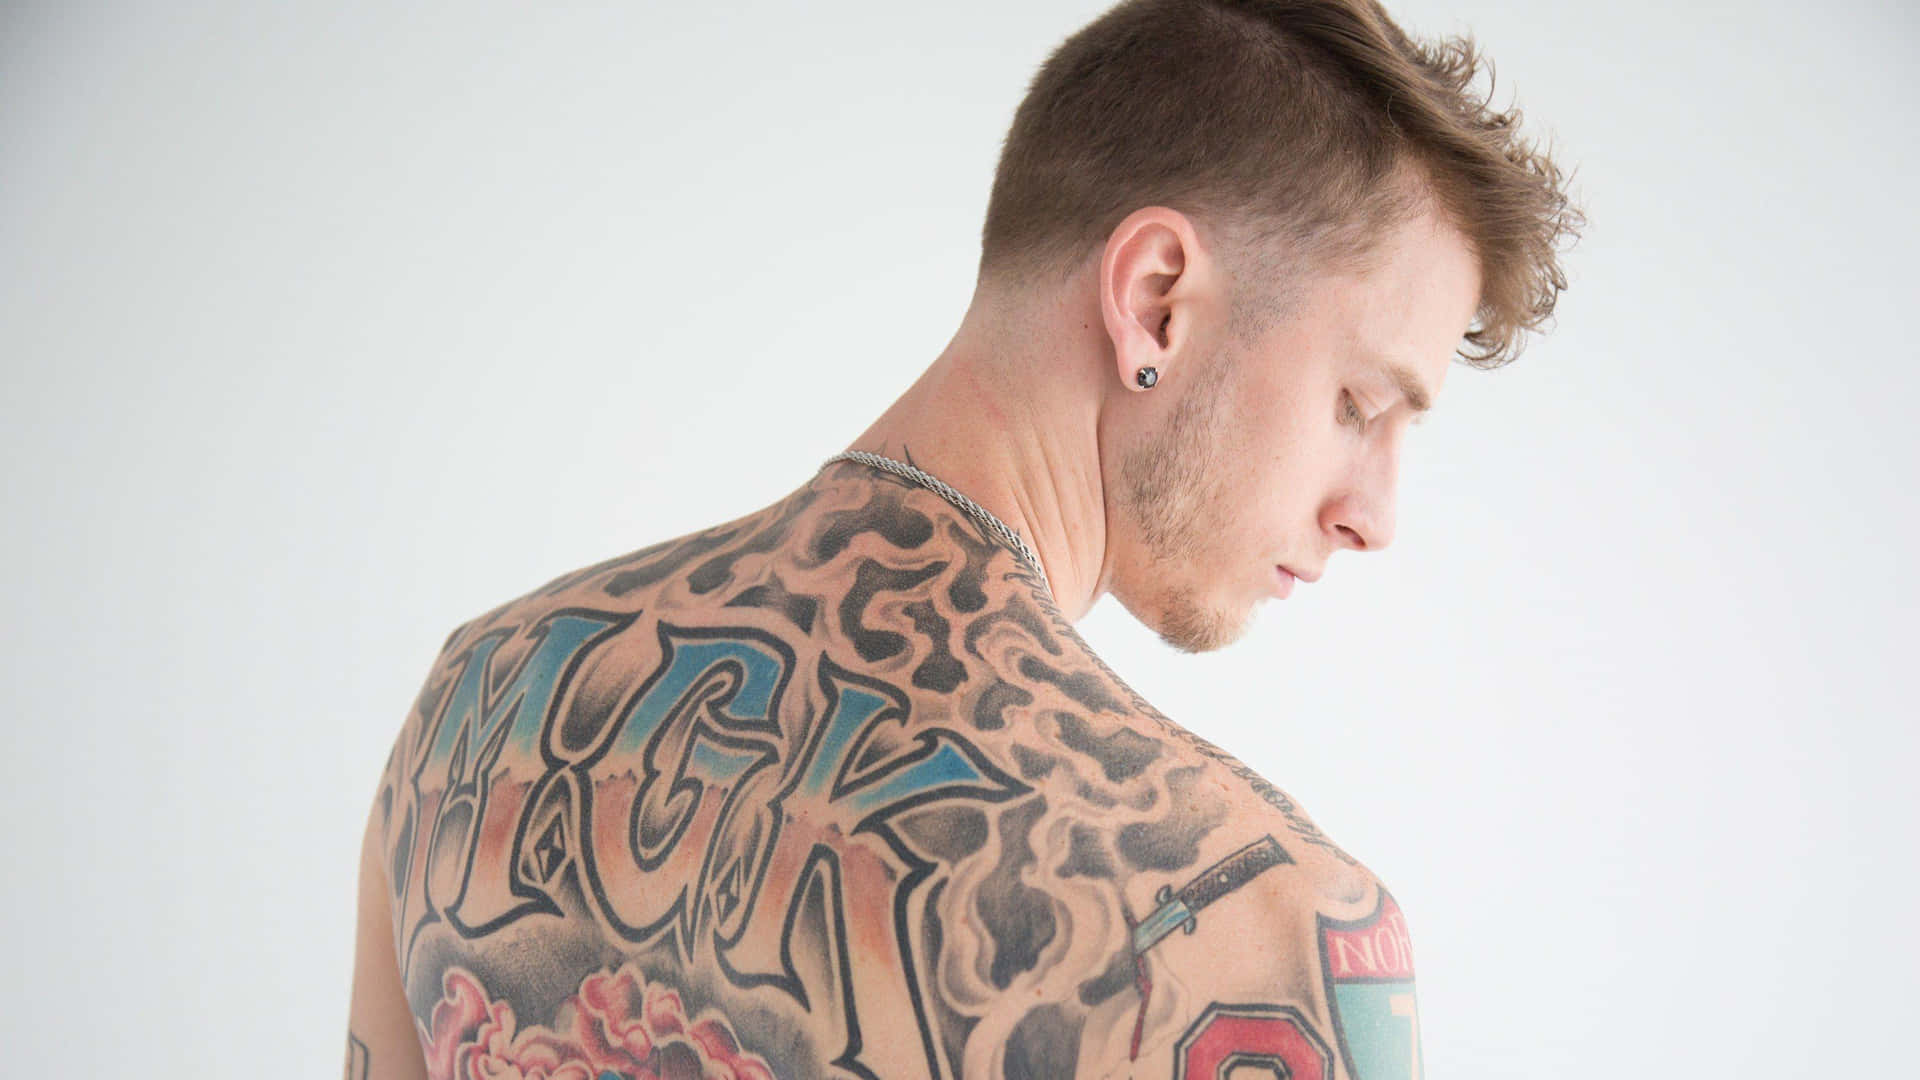 Mgk Showing His Back Background